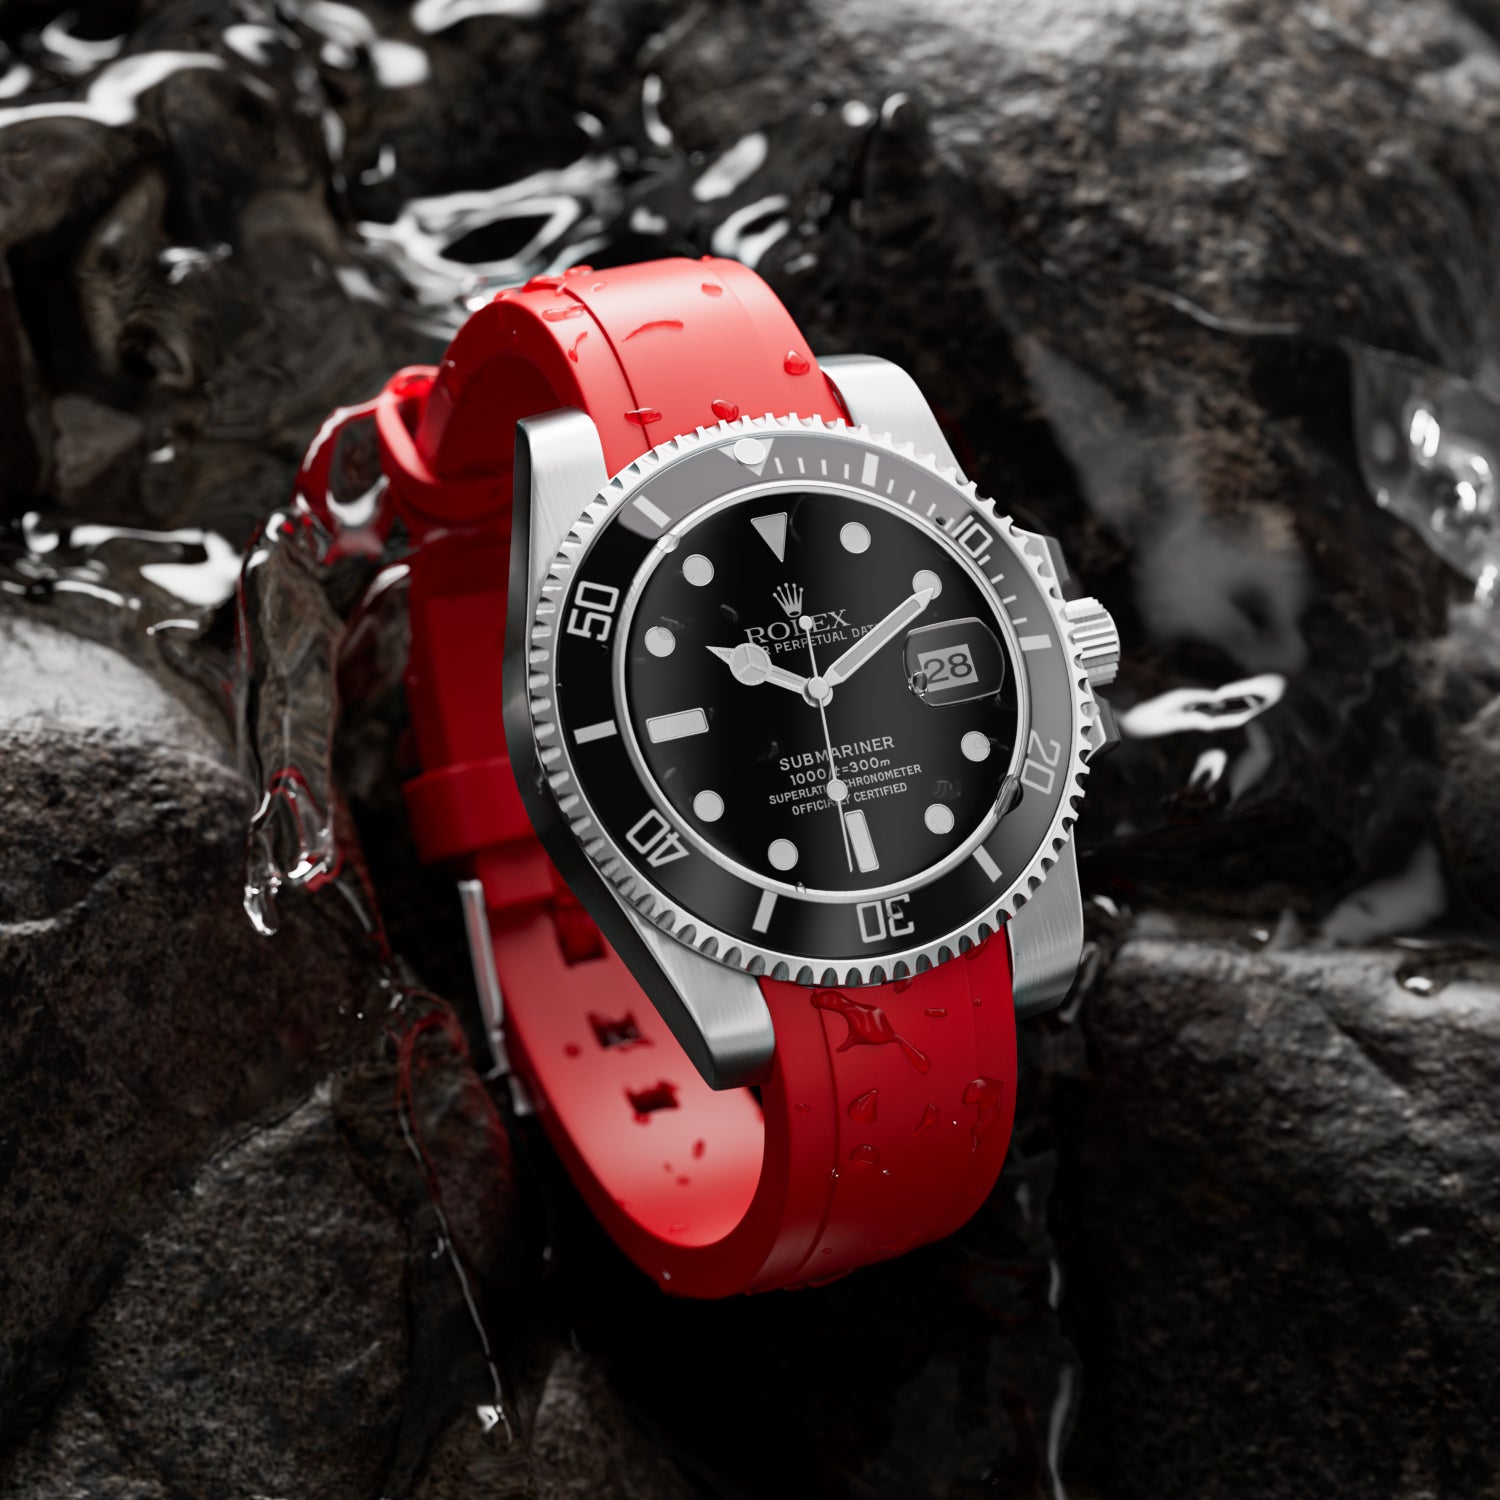 Curved End Soft Silicone Strap -  Compatible with Rolex Submariner - Red (2418)